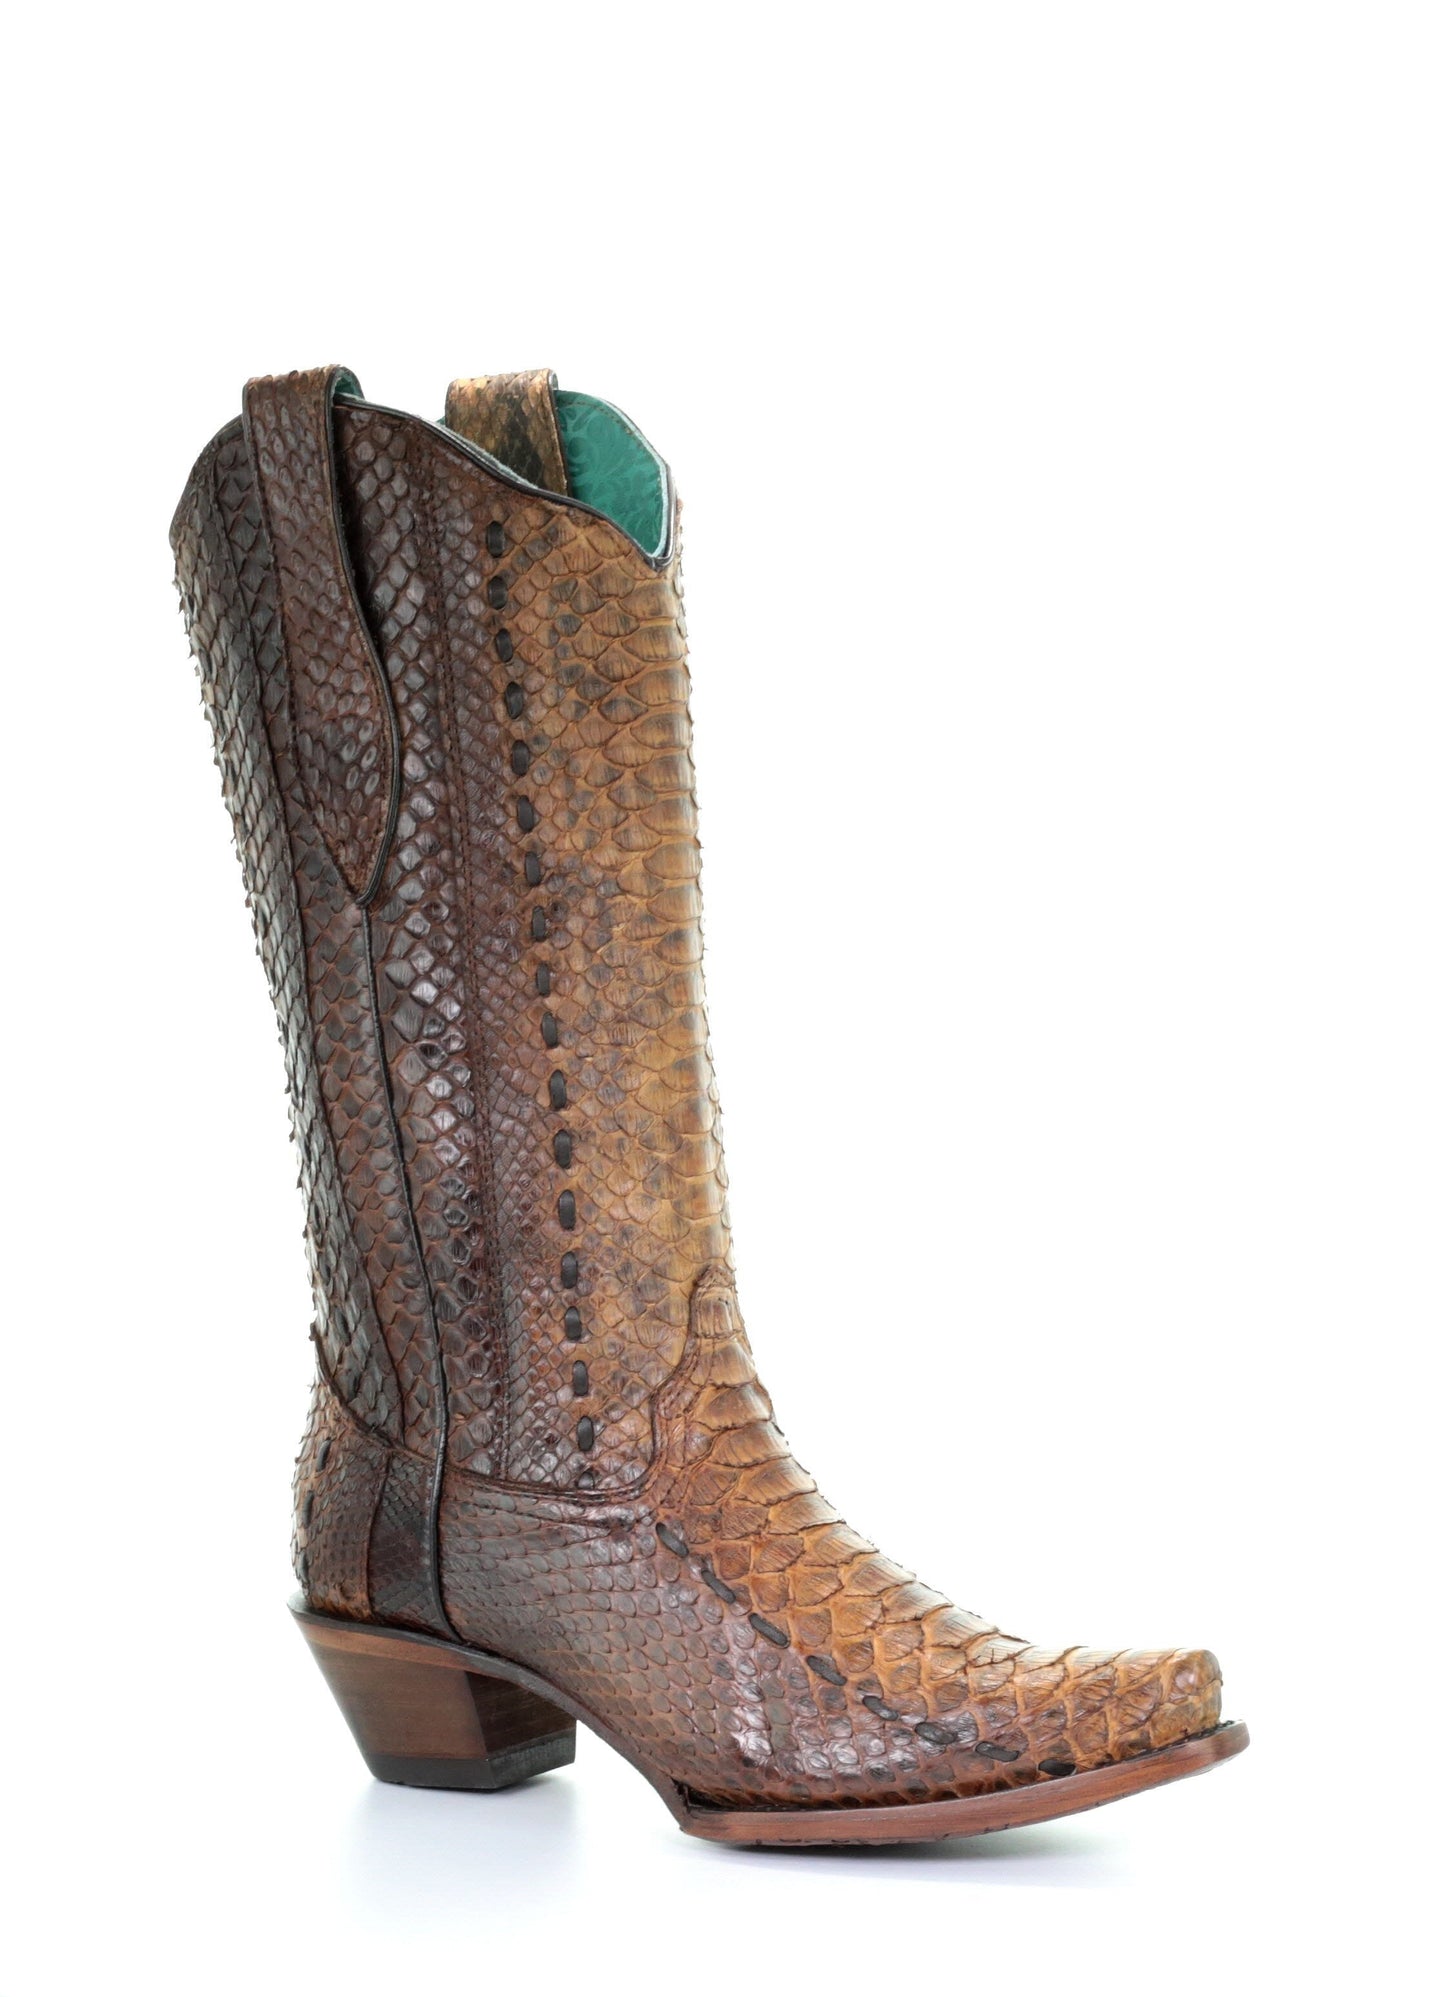 A3659 Corral Boots Women's Full Tan Python Woven Snip Toe Boot